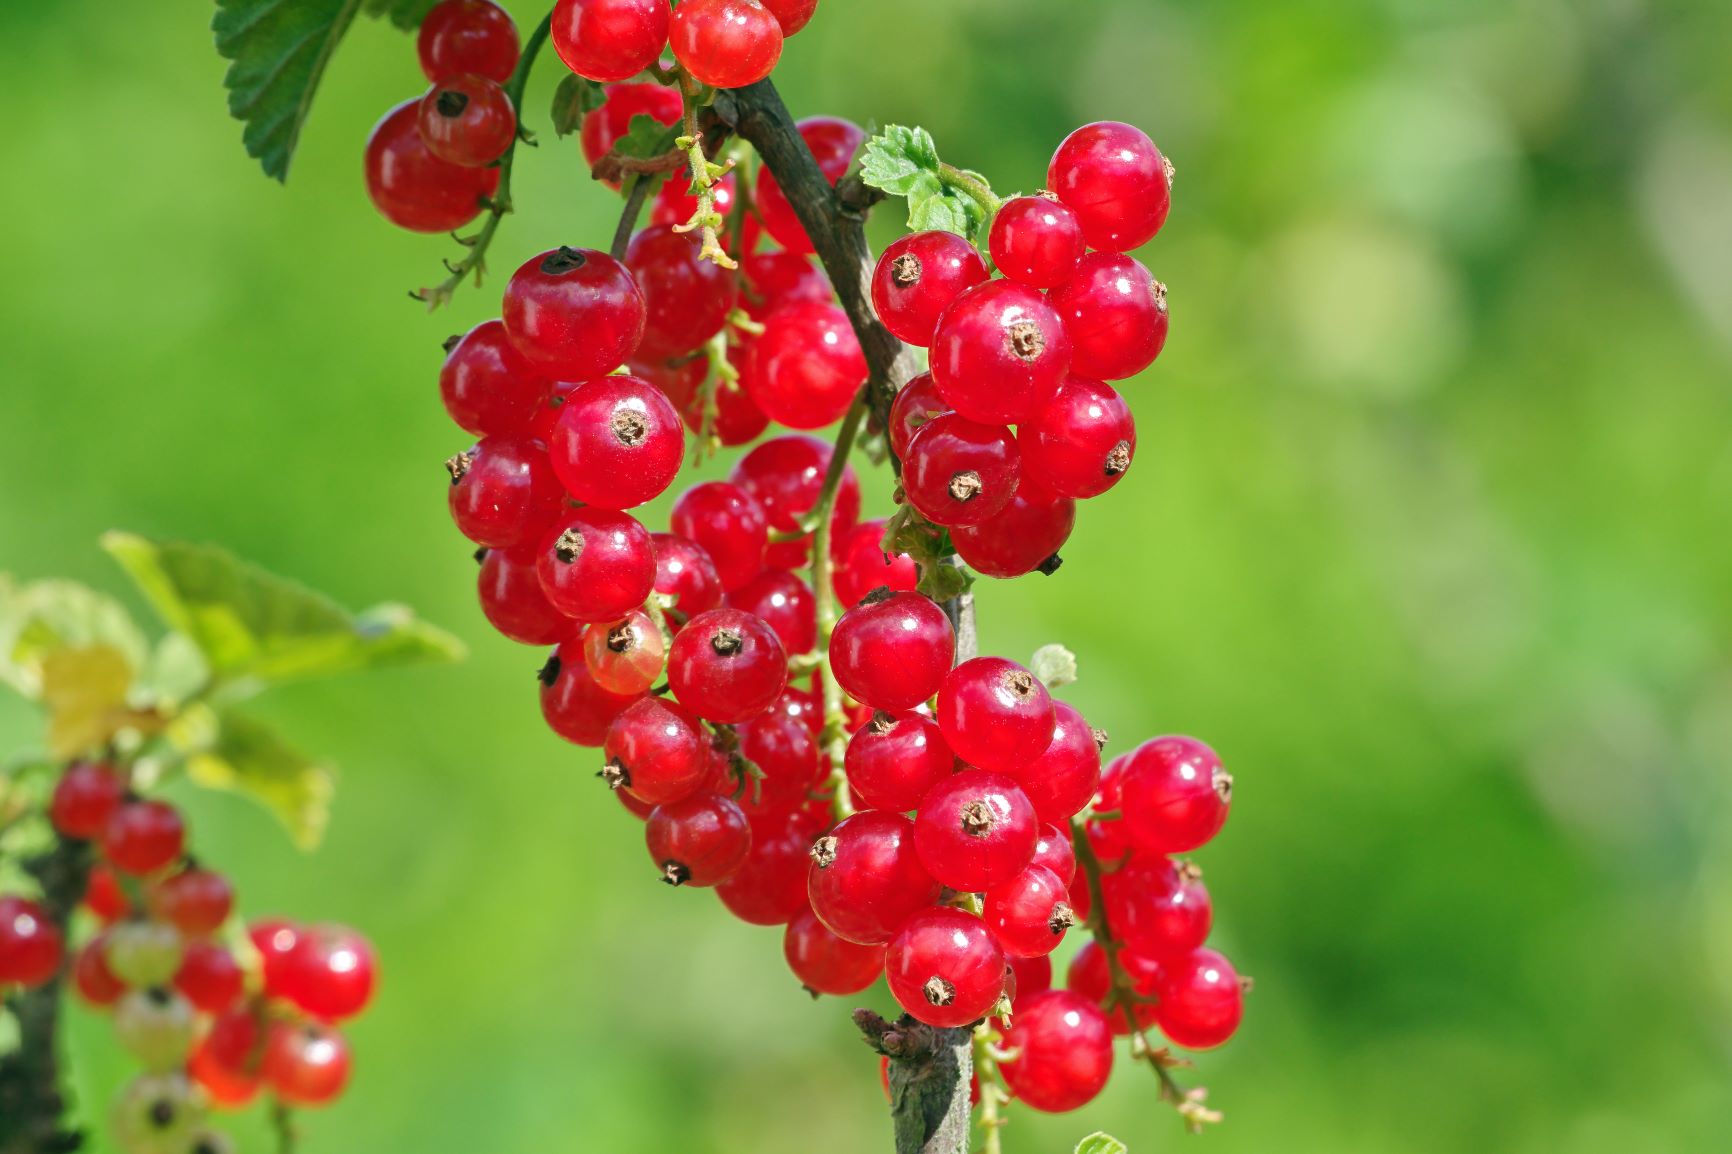 Cluster of red currants on branch